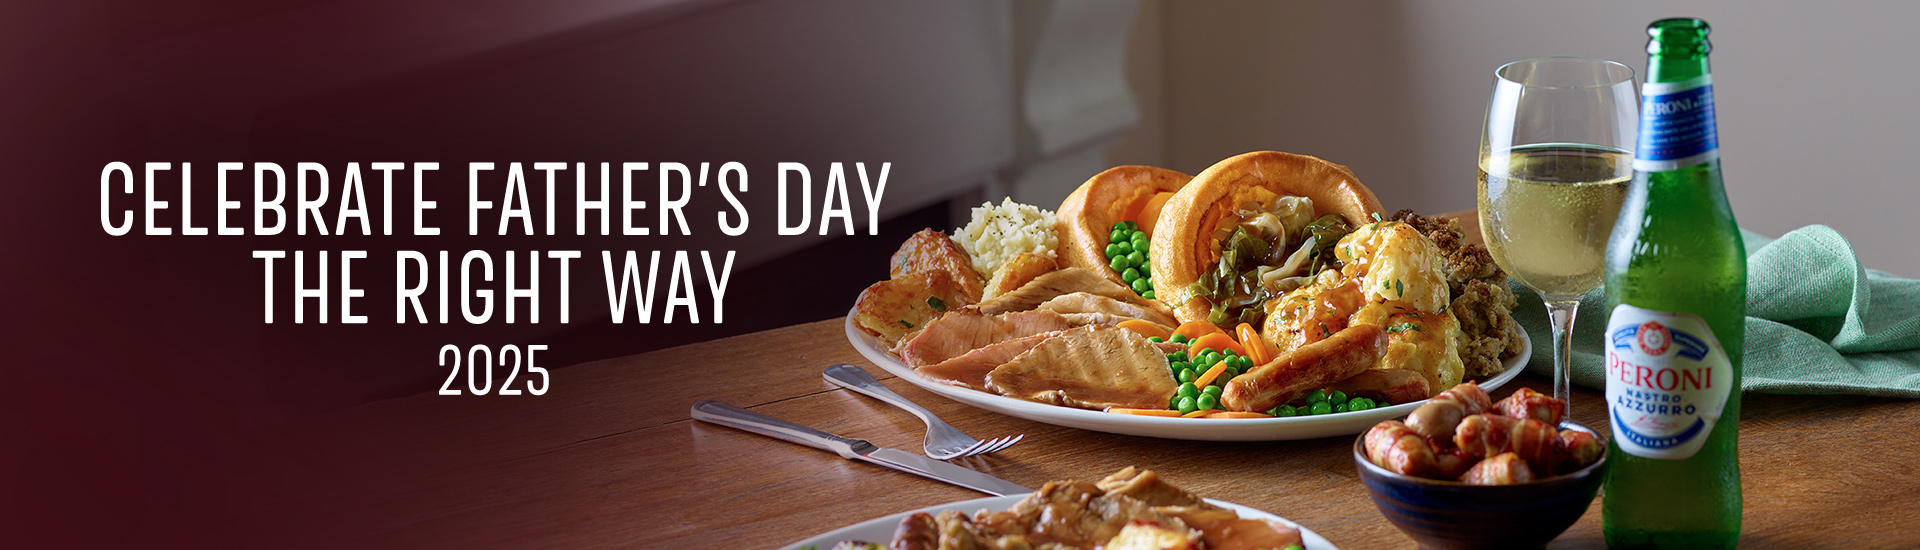 Father’s day carvery in Solihull